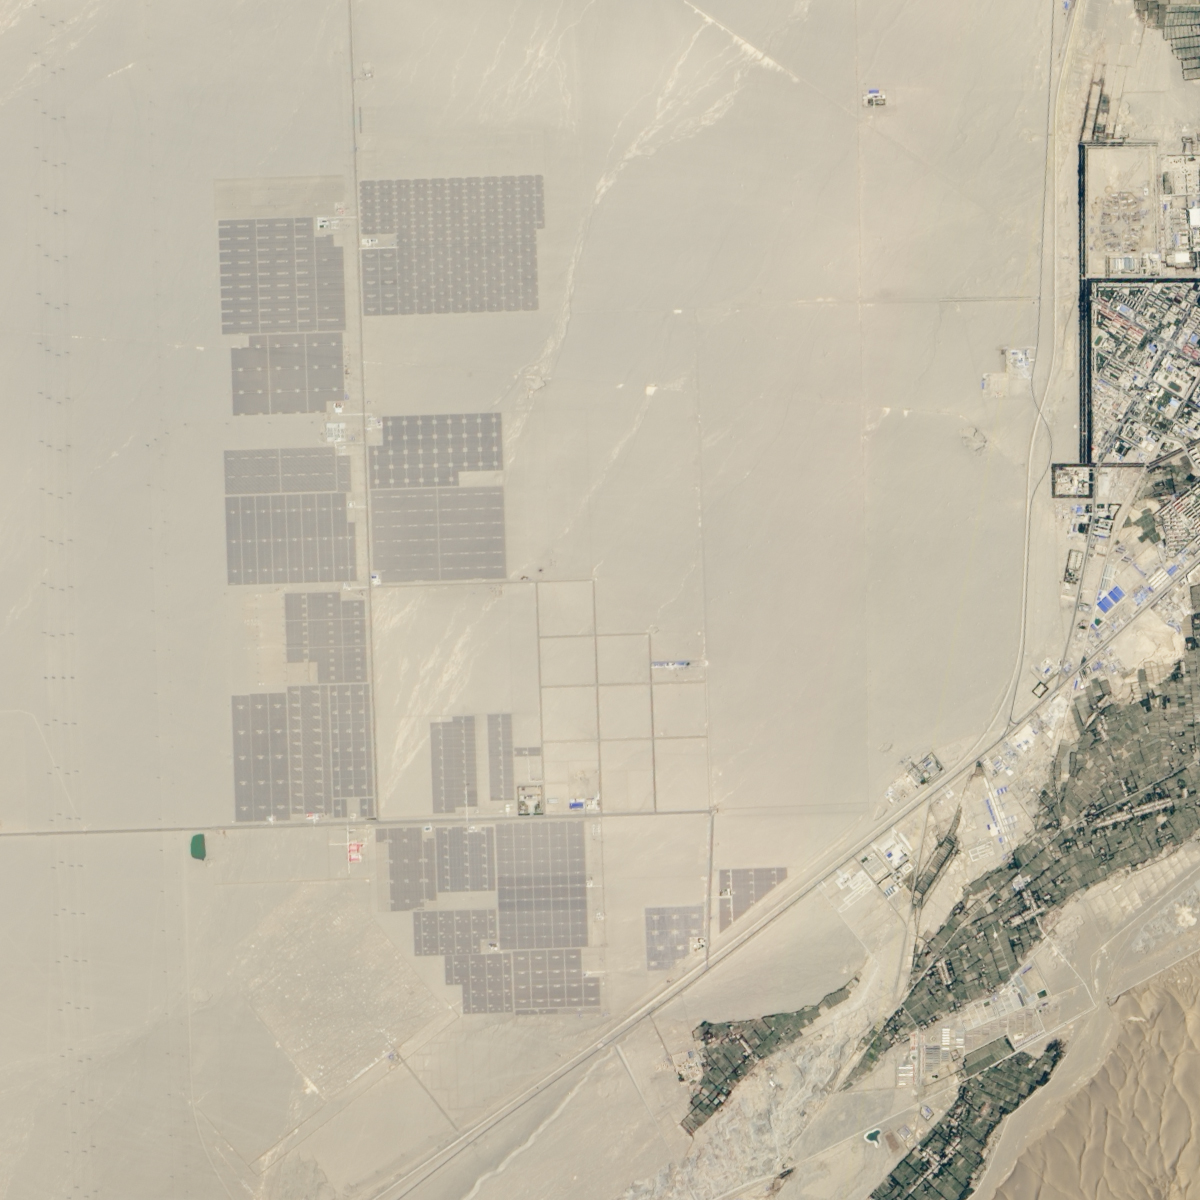 Growth of Solar in the Gobi Desert - related image preview